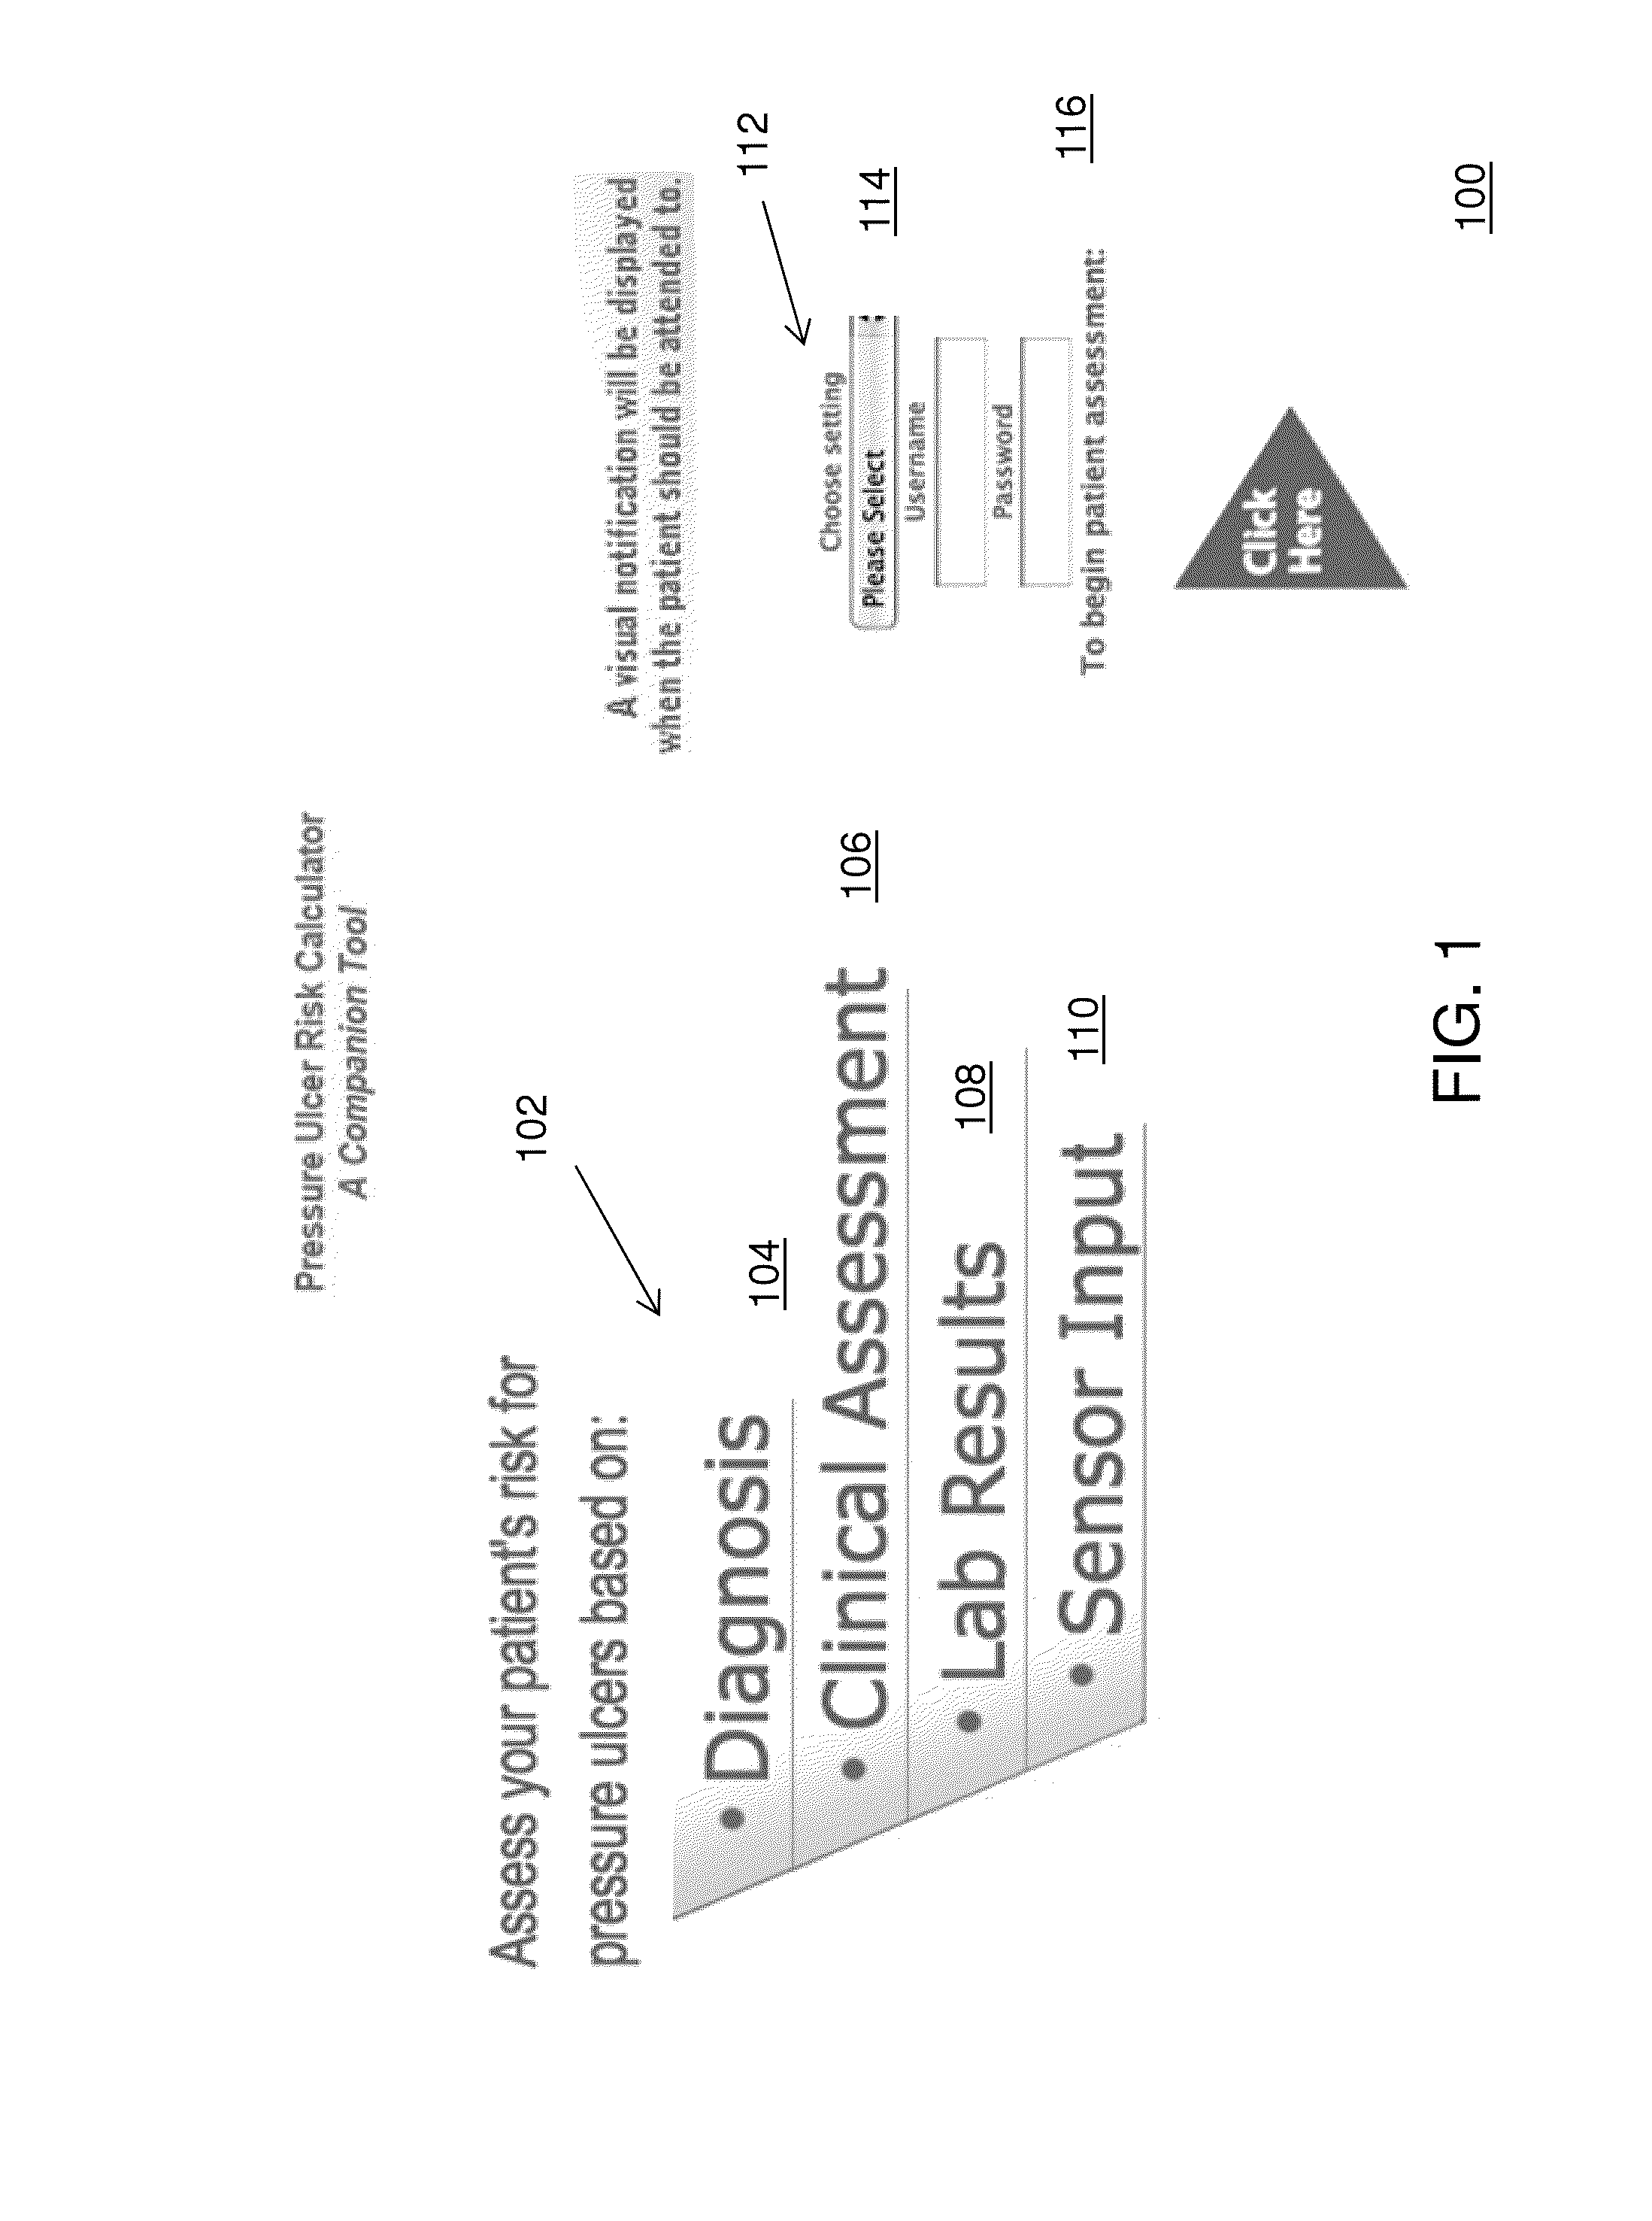 Systems and methods for assessing risks of pressure ulcers